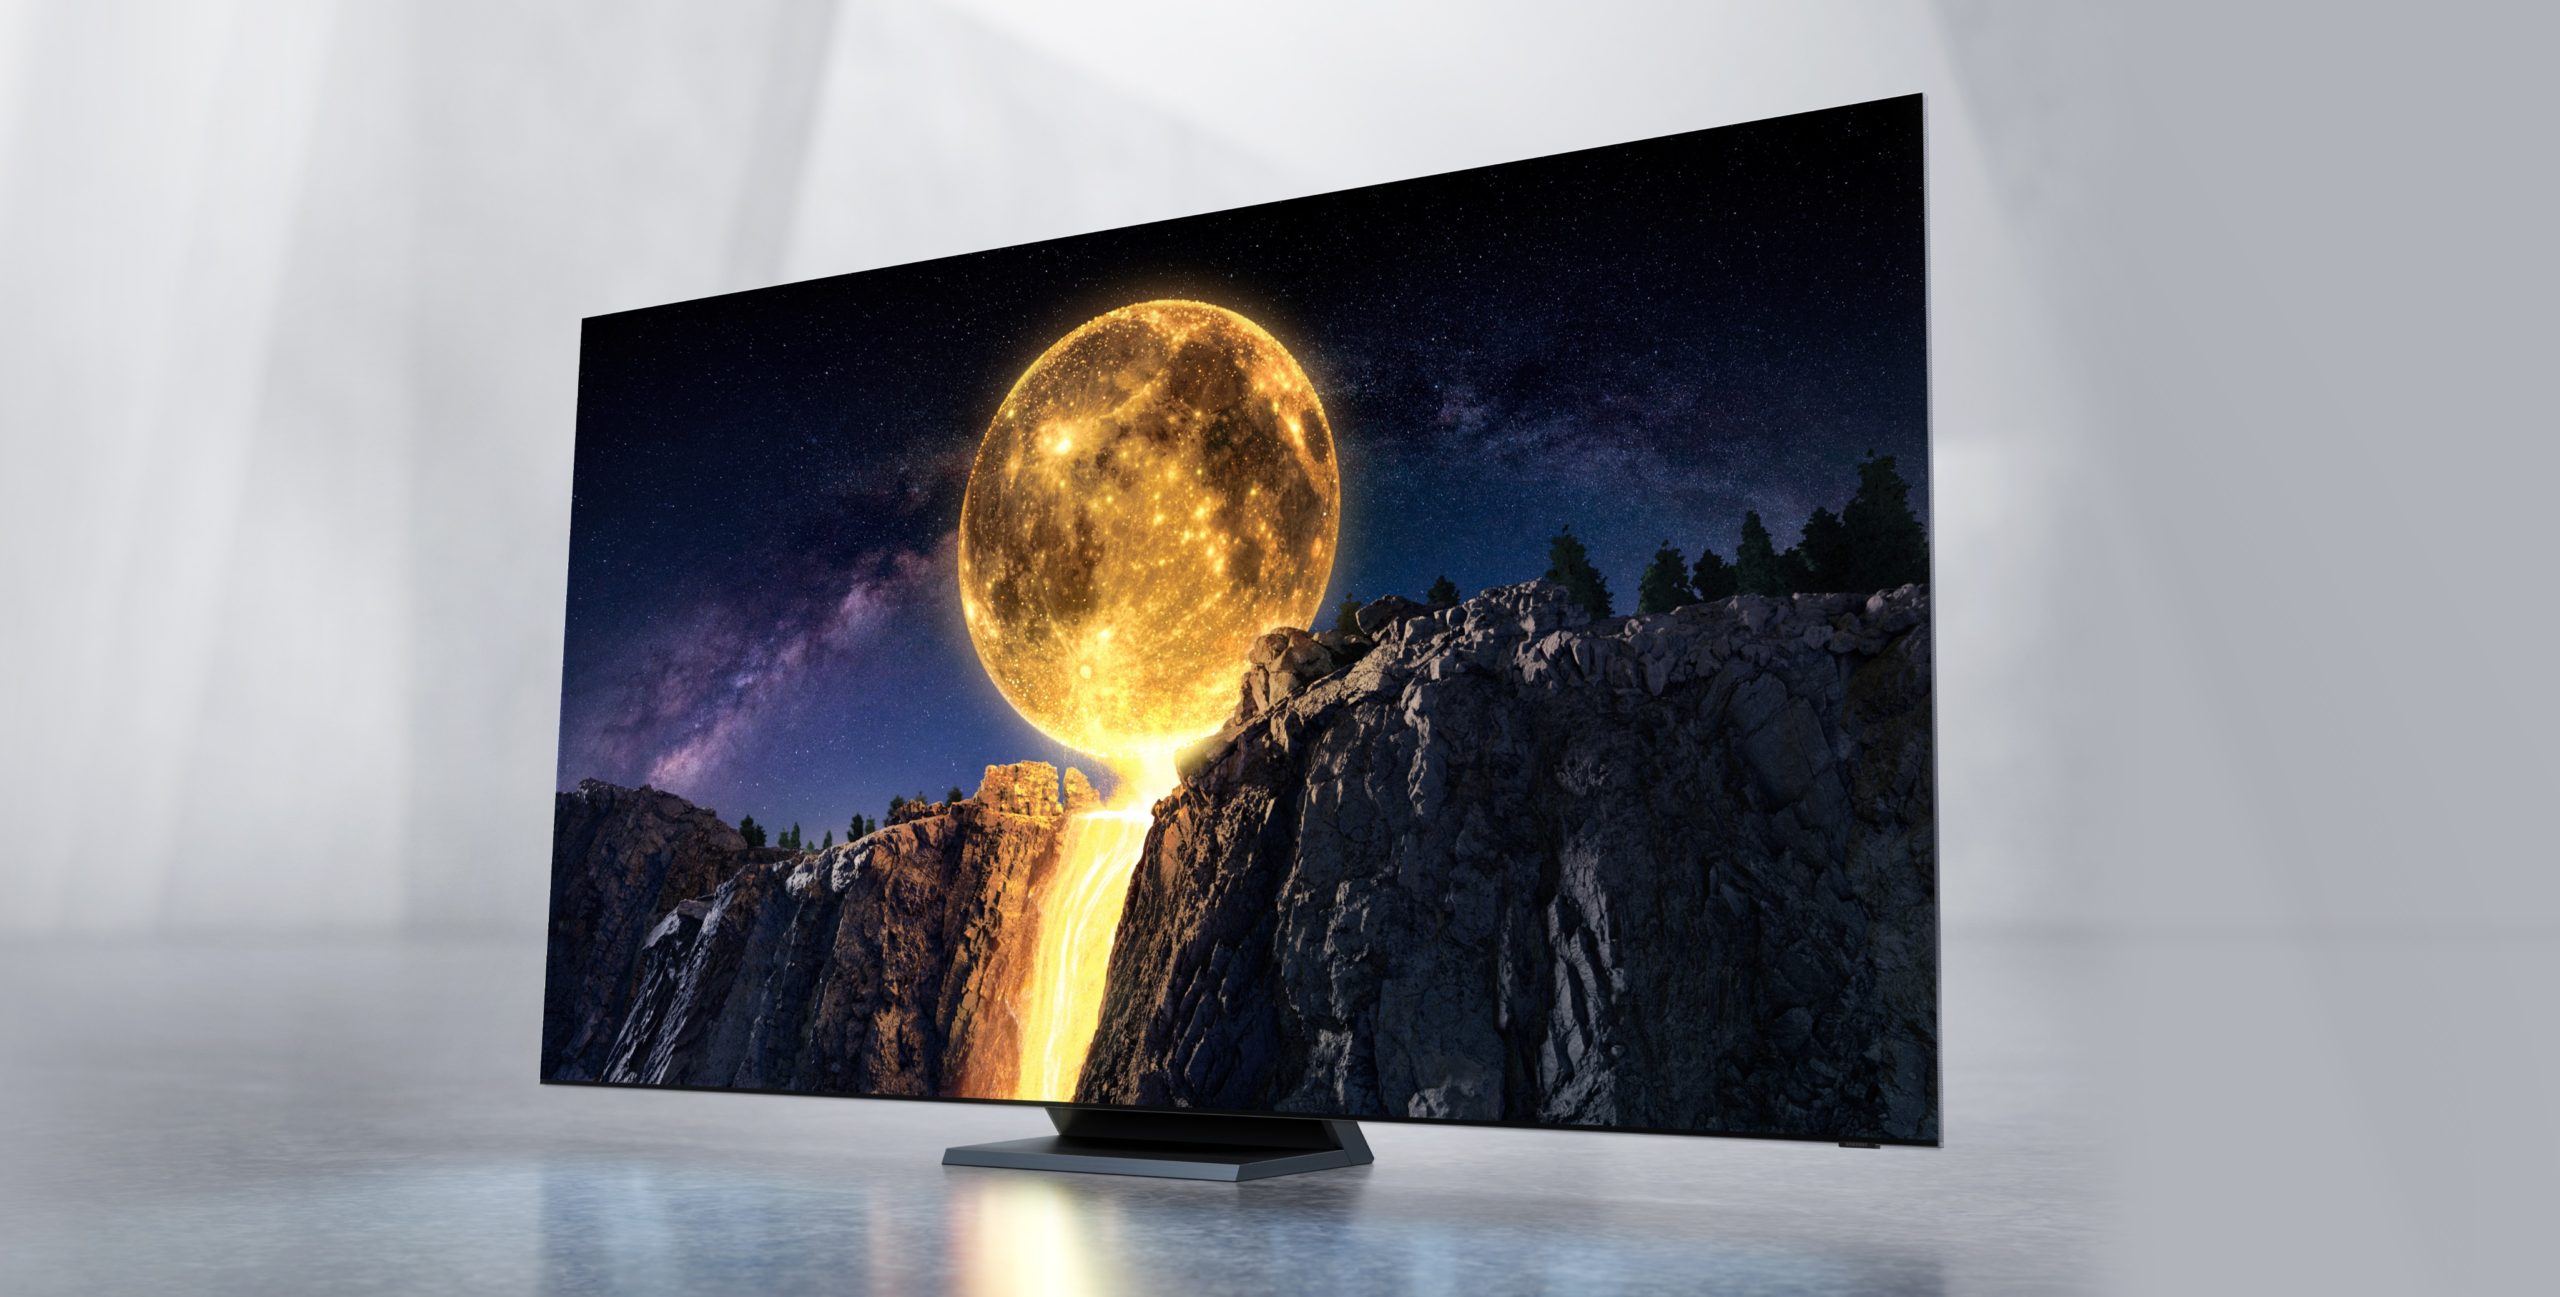 Image for Samsung Launches Its Highly Anticipated 2020 QLED 8K TV In The UAE